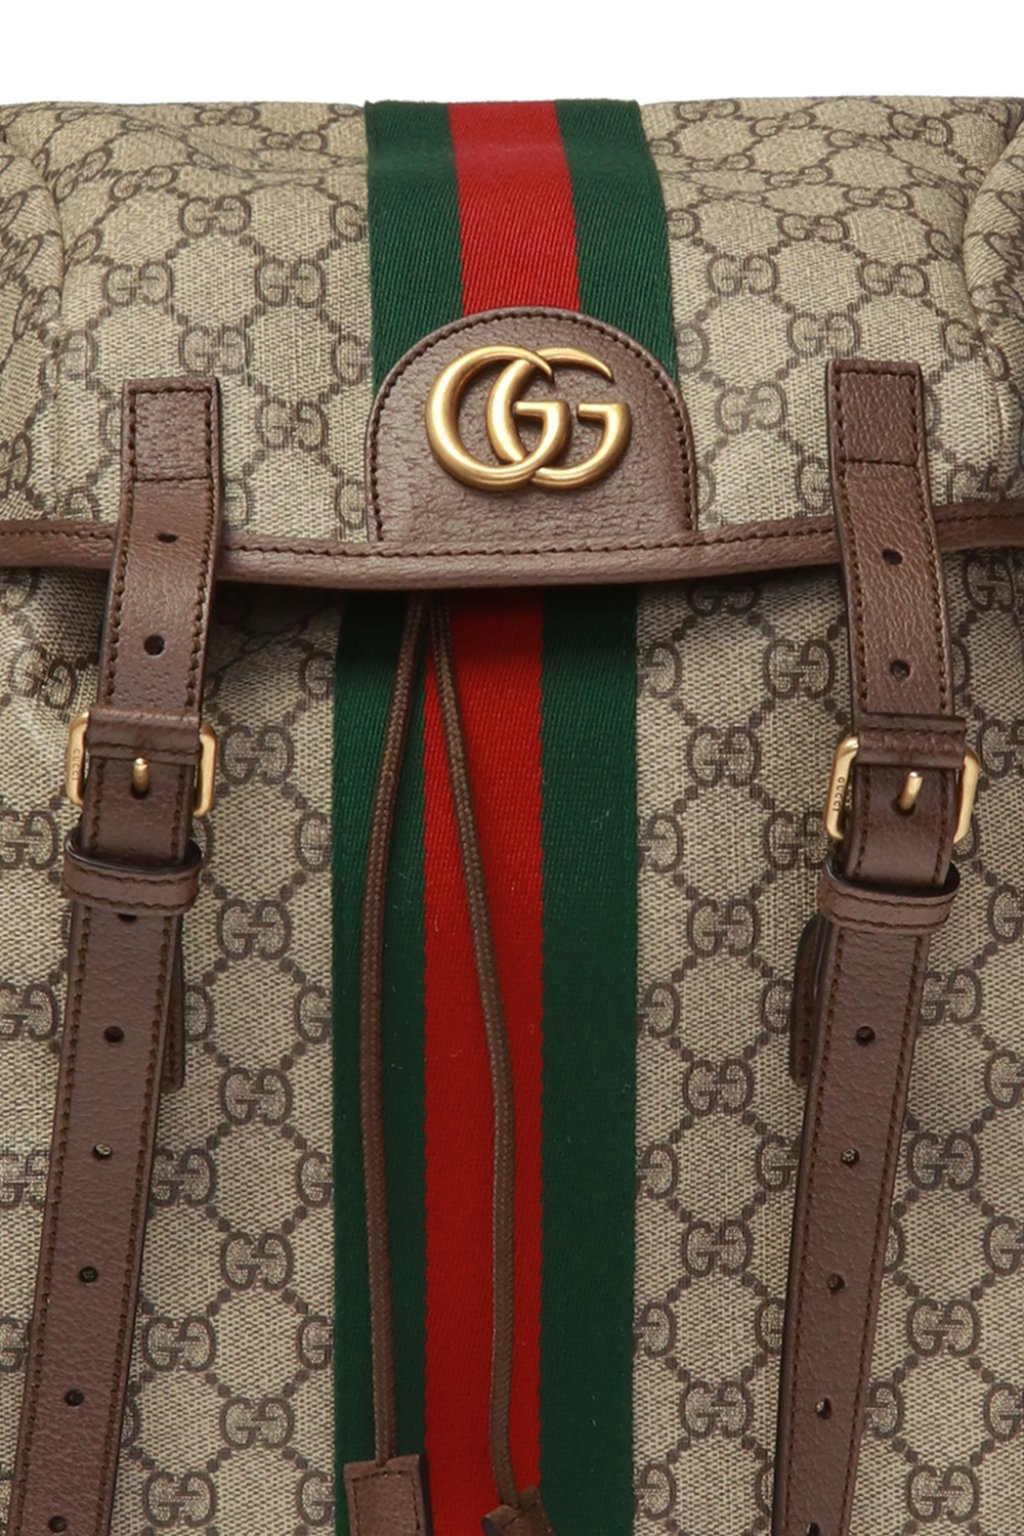 gucci star-print 'Ophidia' backpack